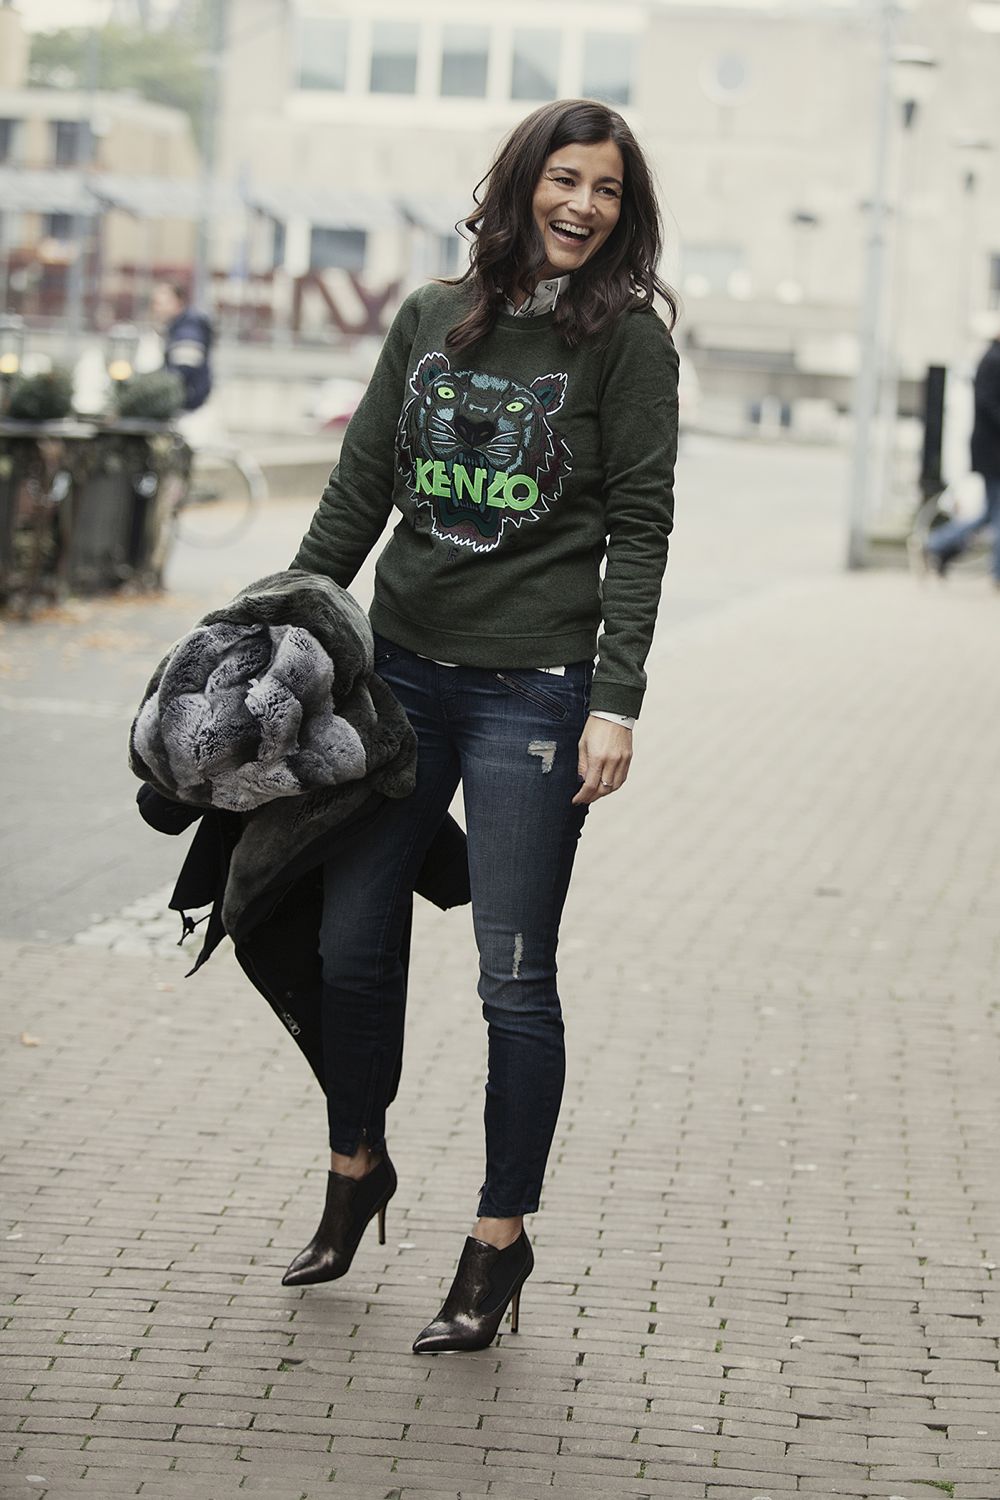 Streetstyle 2015 new fall wintercollection Kenzo sweater, Woolrich coat BlogForShops styling for Jimmy's Mode in Tilburg